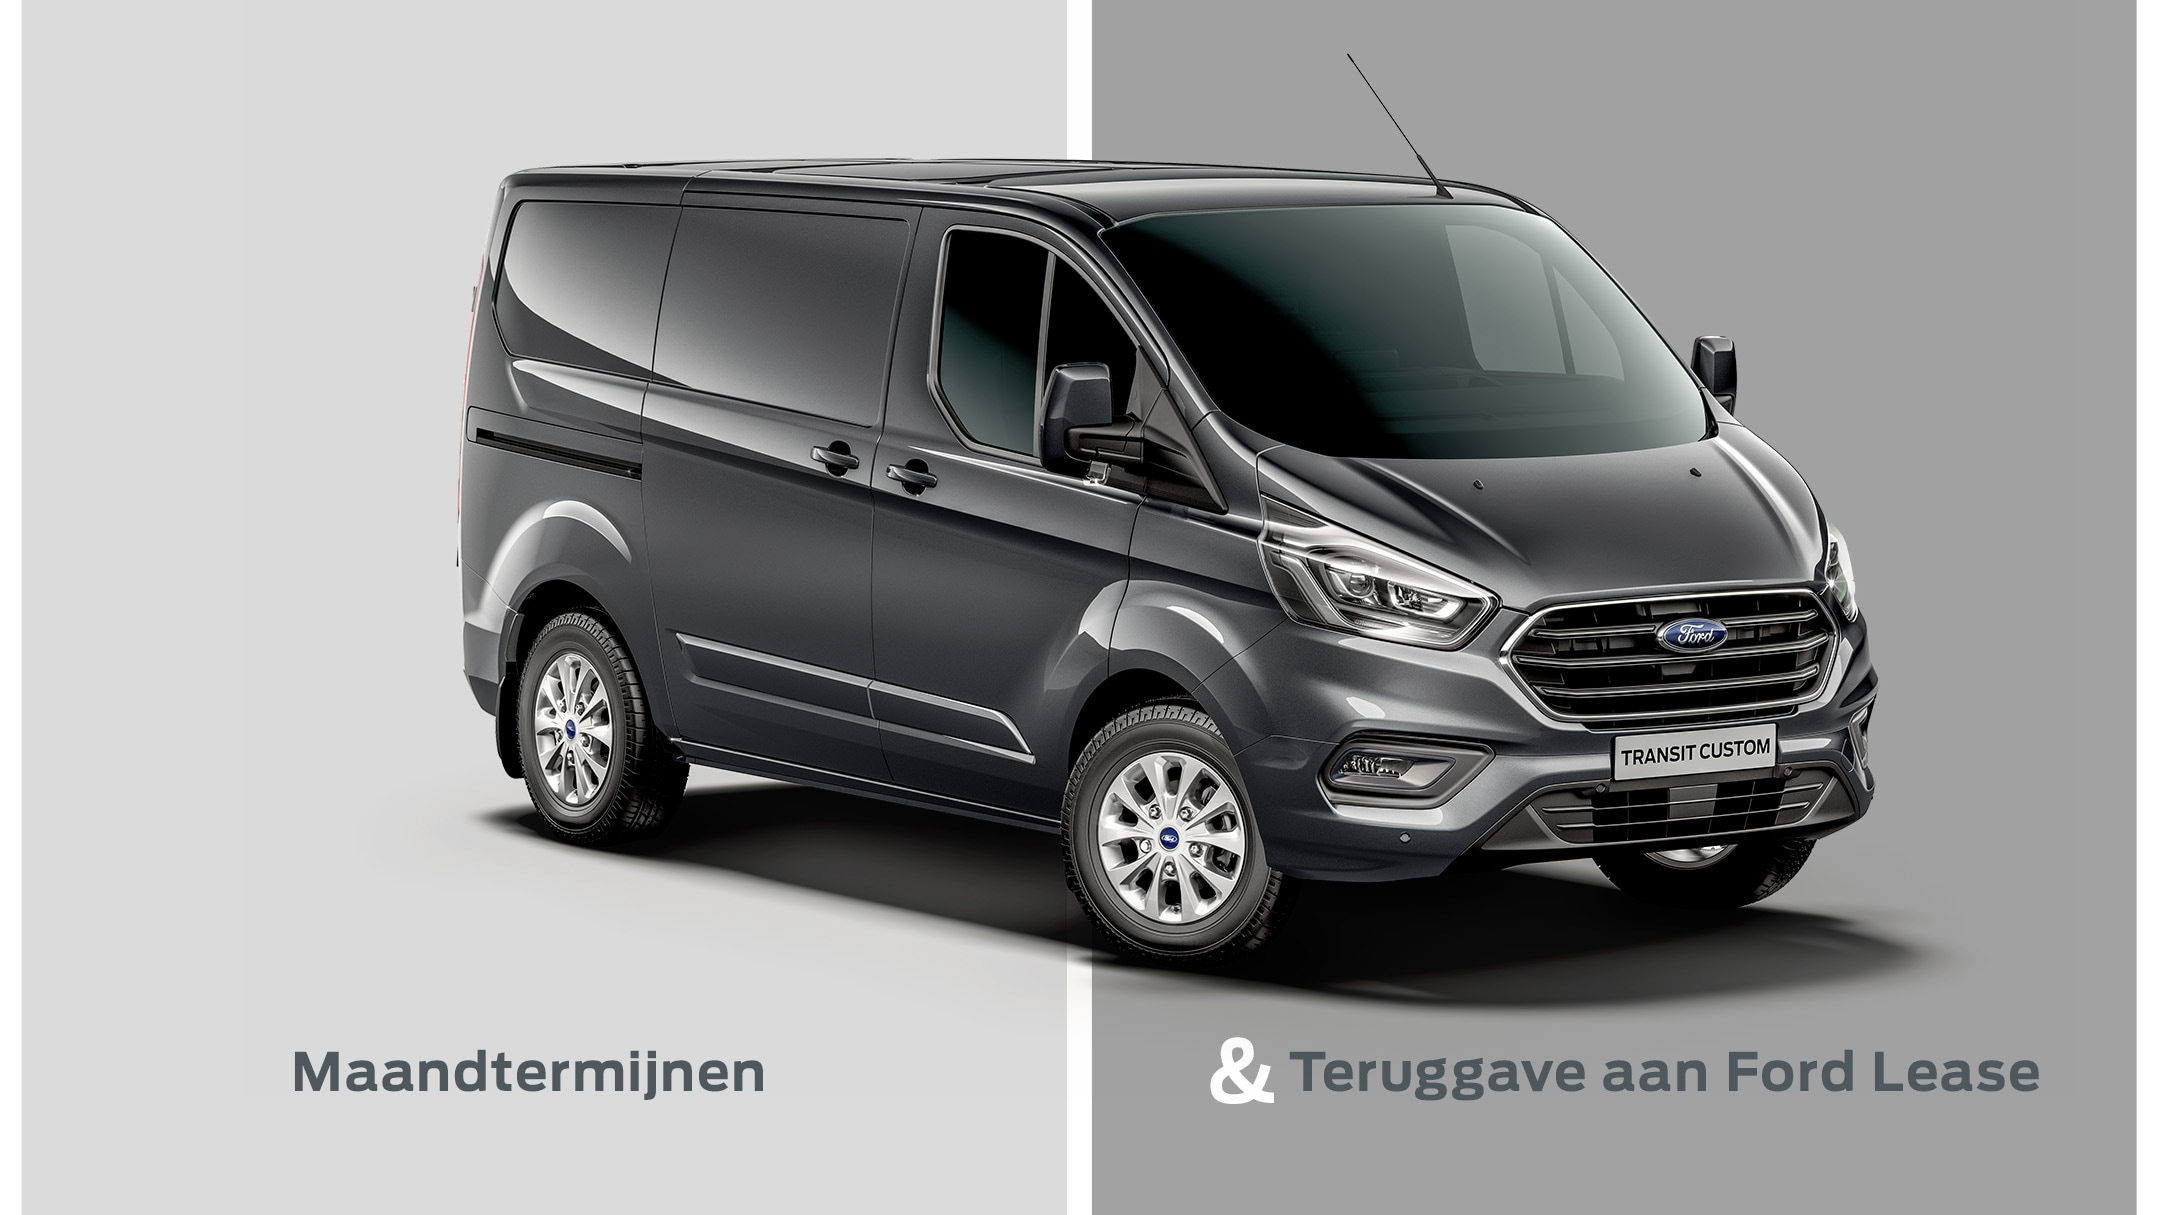 Image of black Transit Custom split into two sections - advance rental, return vehicle to ford lease